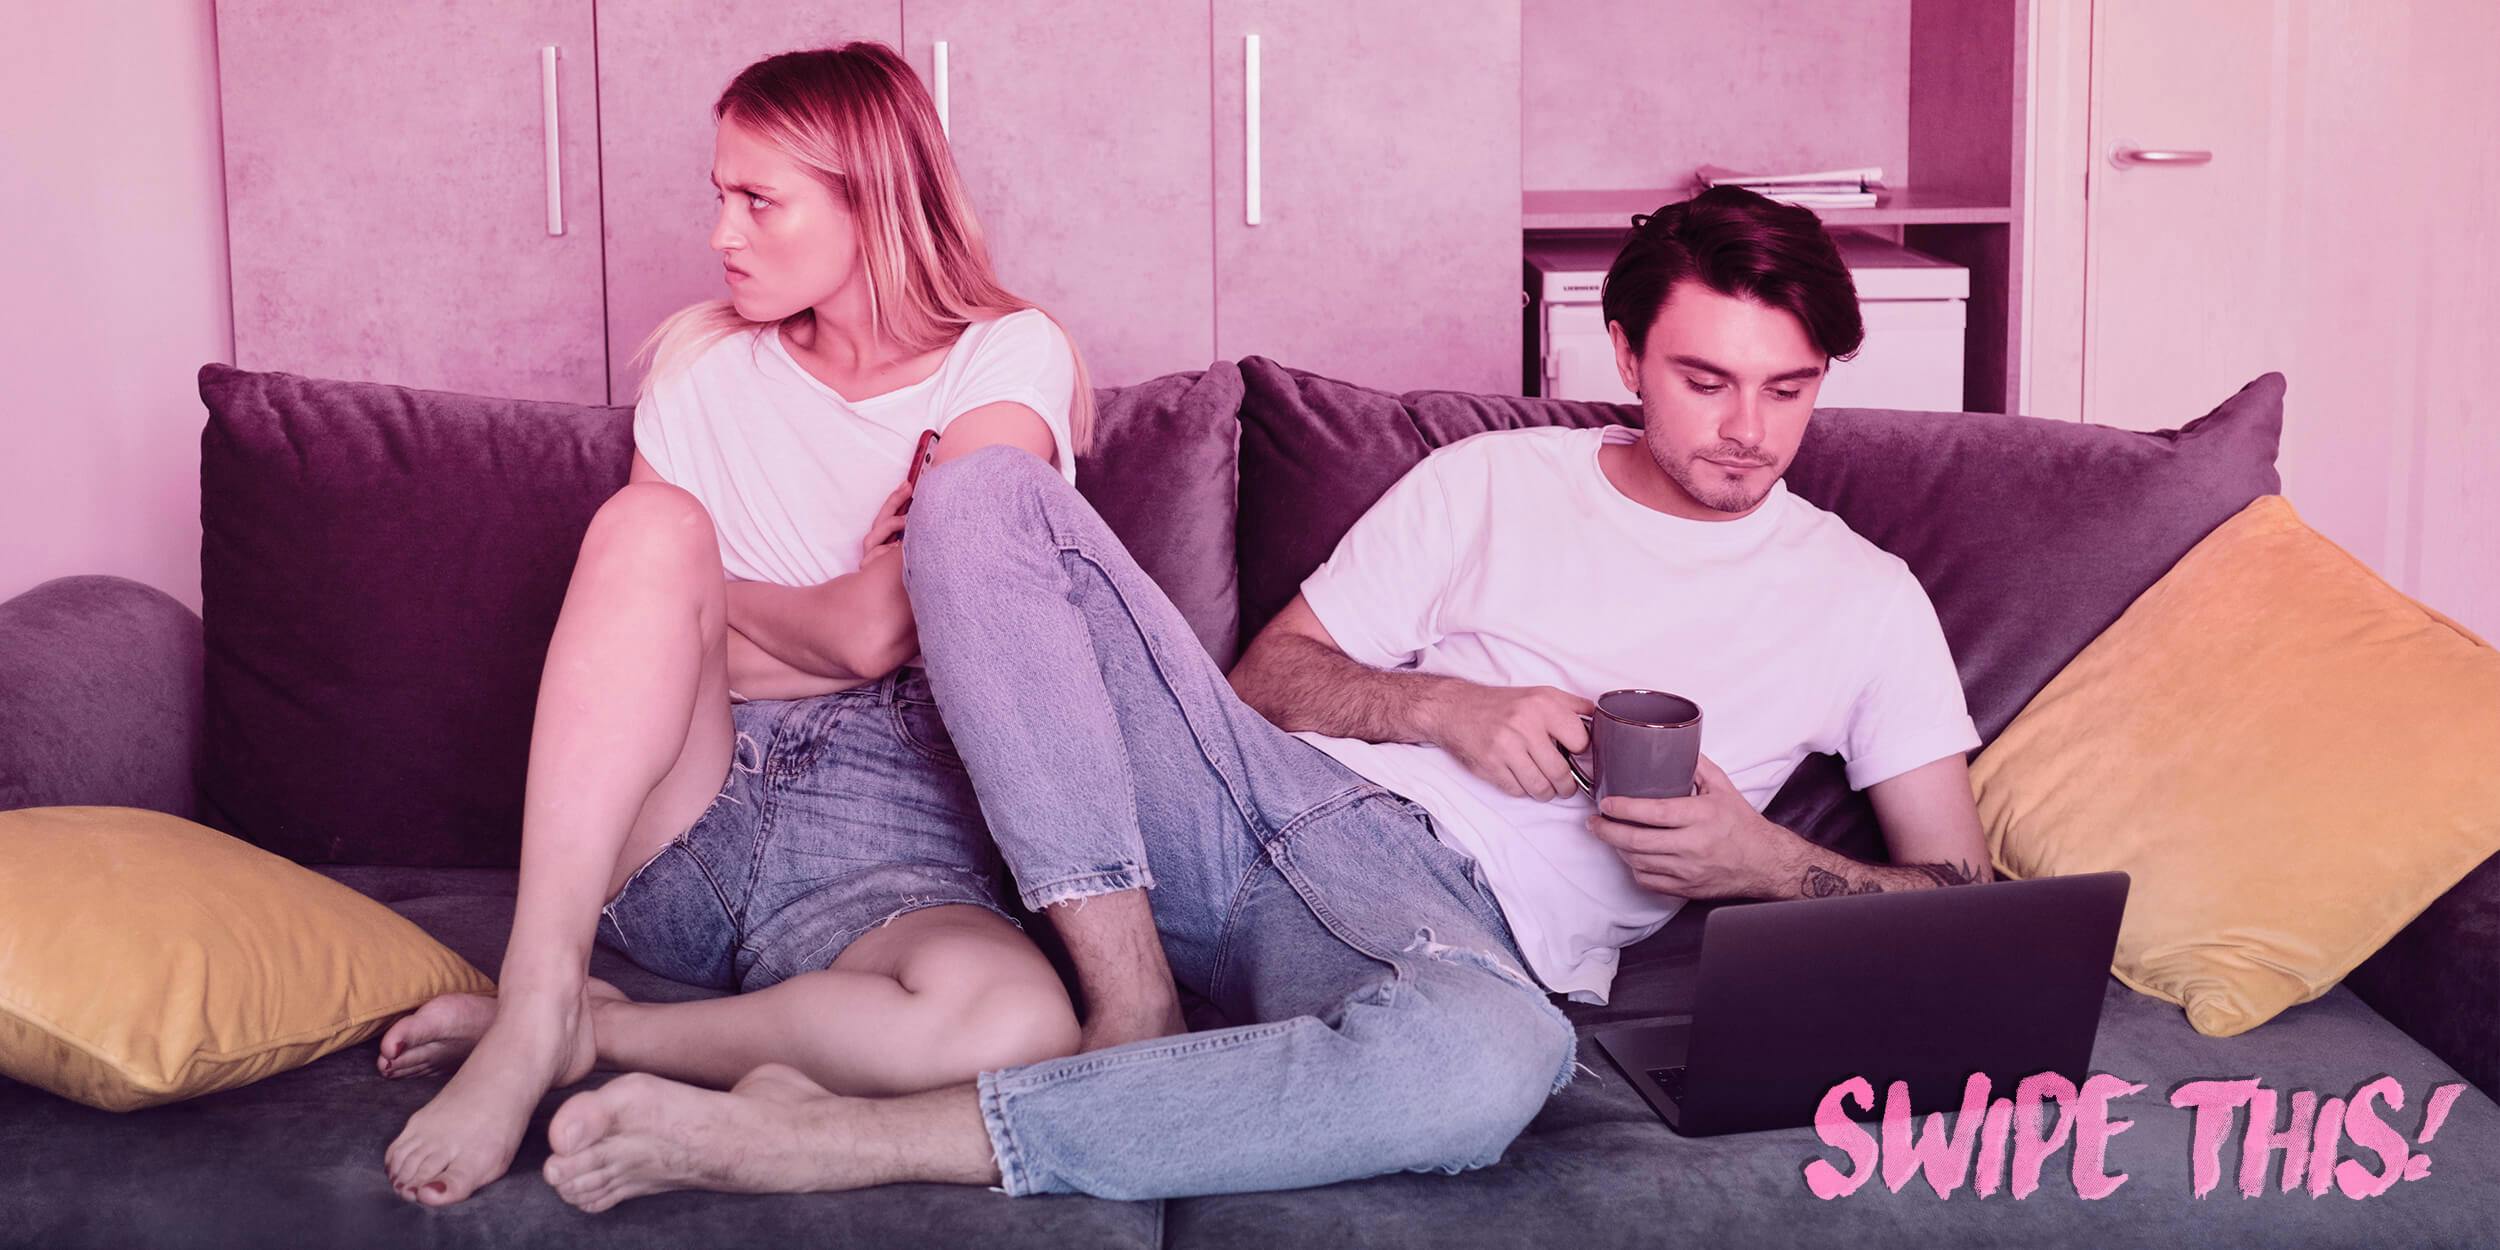 Swipe This! My boyfriend is addicted to porn. Should I leave him?